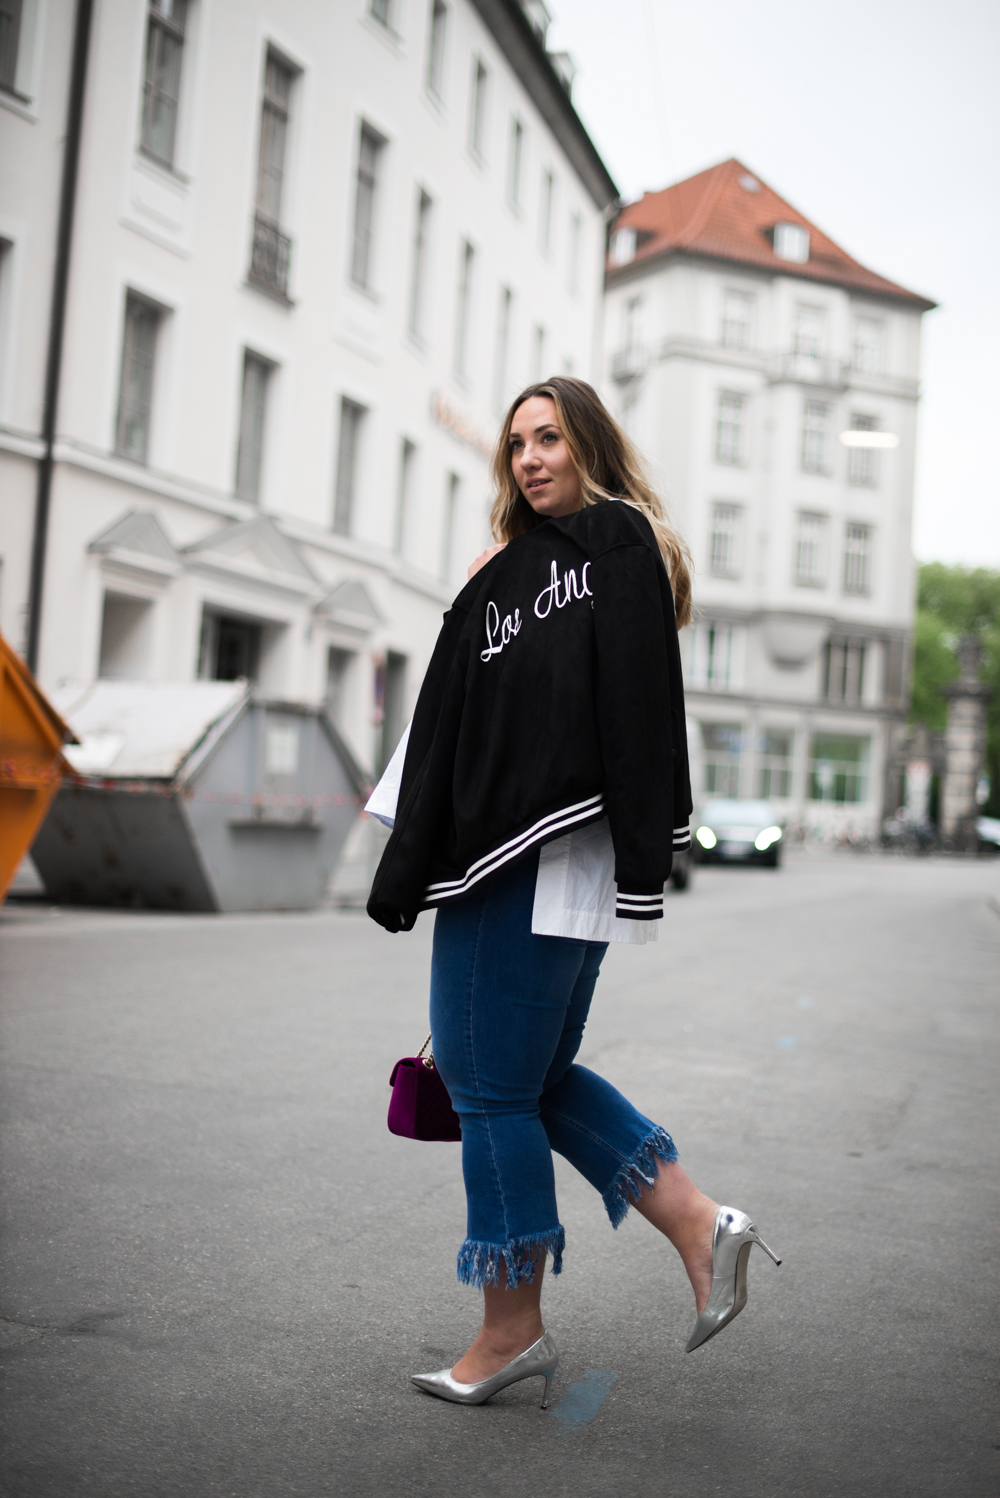 Gucci_The Skinny and the Curvy One_Ms wunderbar_Plus Size Blogger_curve blog_Fashionblog Deutschland_Plus Size Fashion Deutschland_College Jacke_Fringe Jeans (12 von 15)